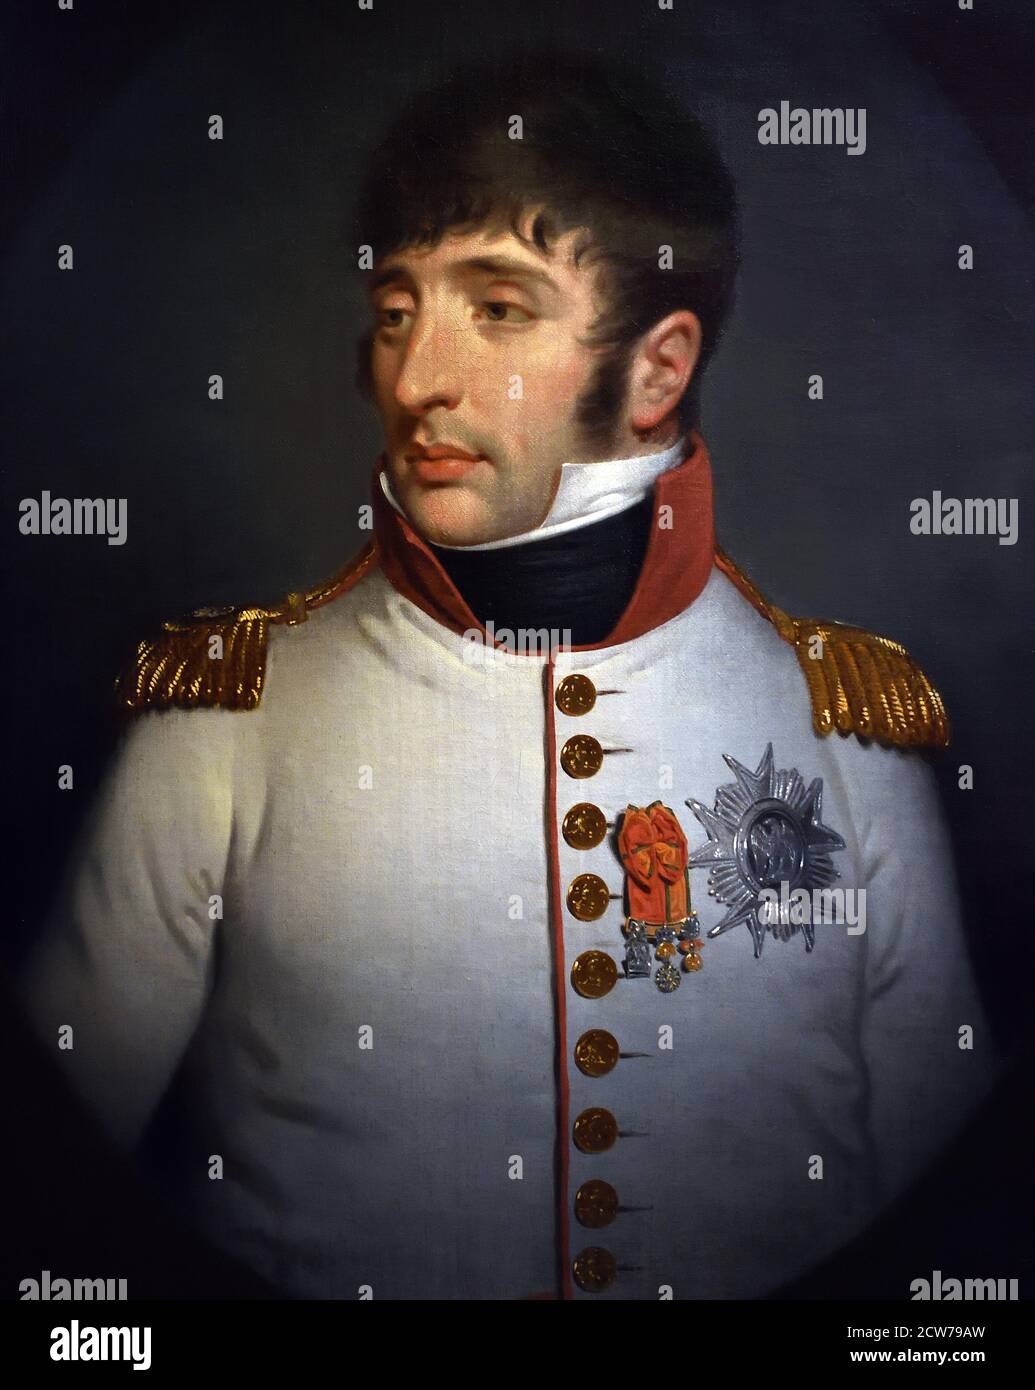 King Louis Napoléon Bonaparte was a younger brother of Napoleon I, Emperor of the French. He was a Monarch 1806 to 1810, ruling over the Kingdom of Holland. 1808 by Charles Howard Hodges 1764-1837 The, Netherlands, Dutch, Stock Photo